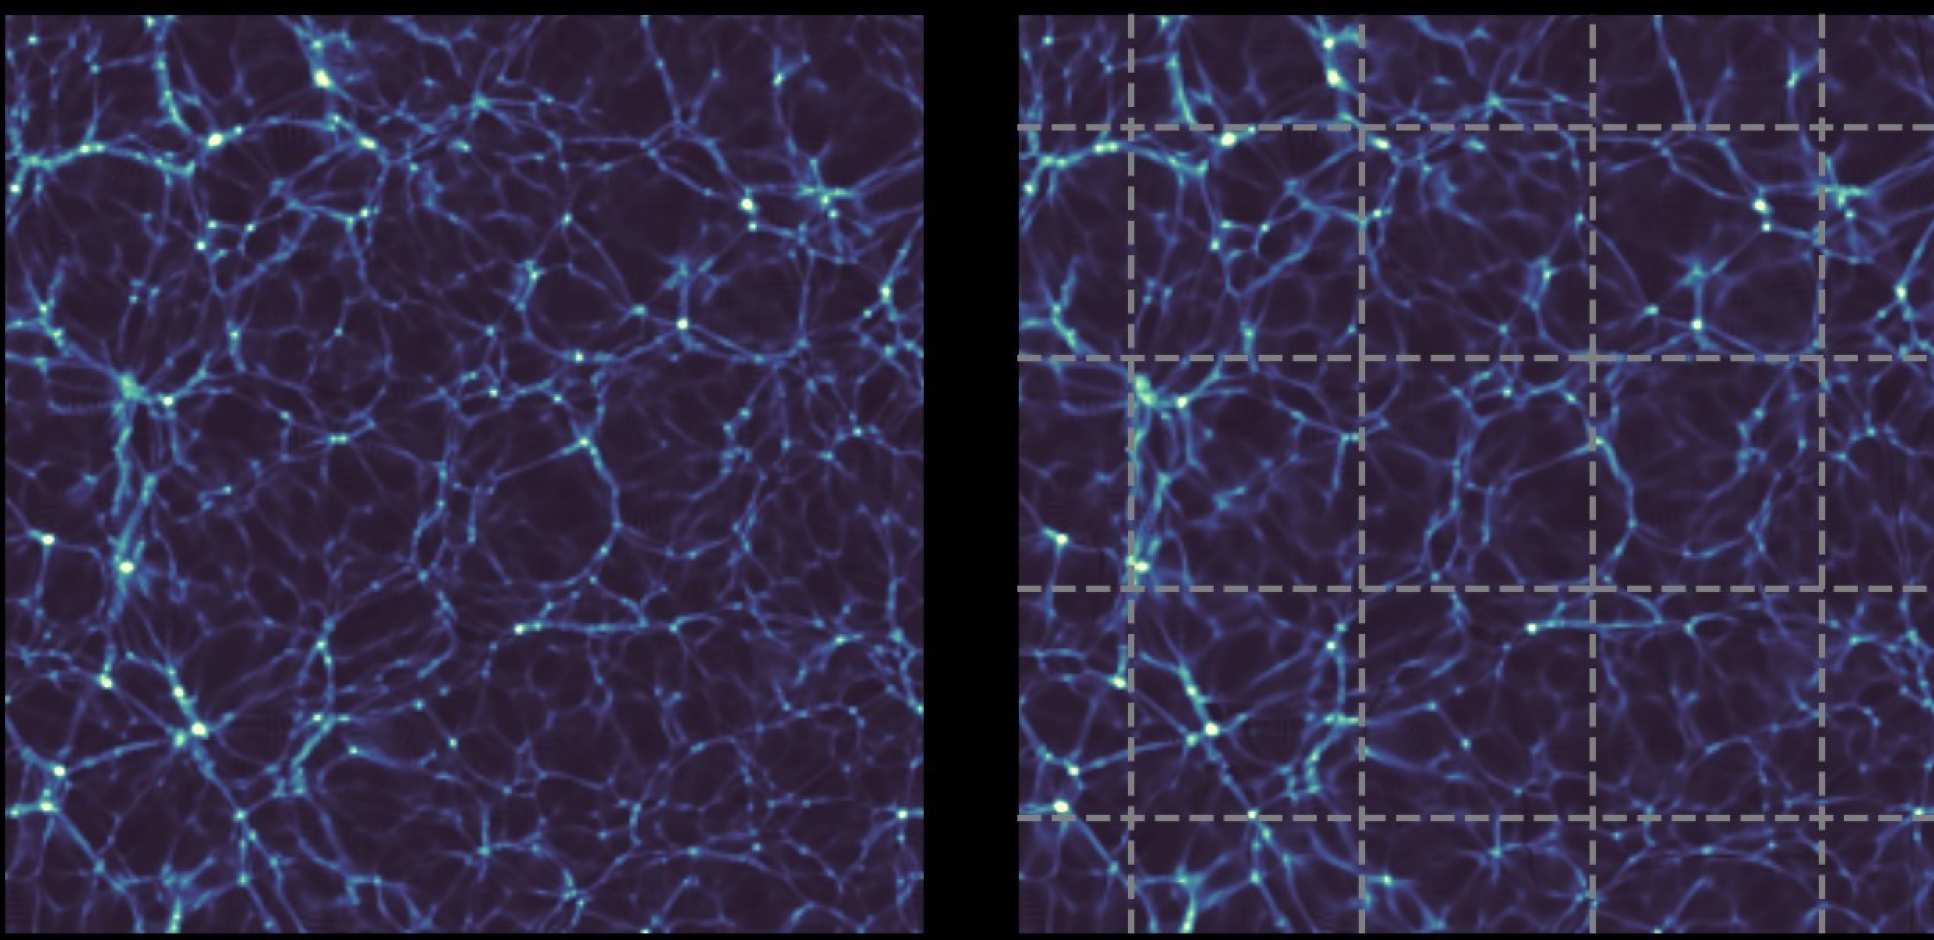 An image that looks like a network (left) and the same image with a grid overlayed (right)